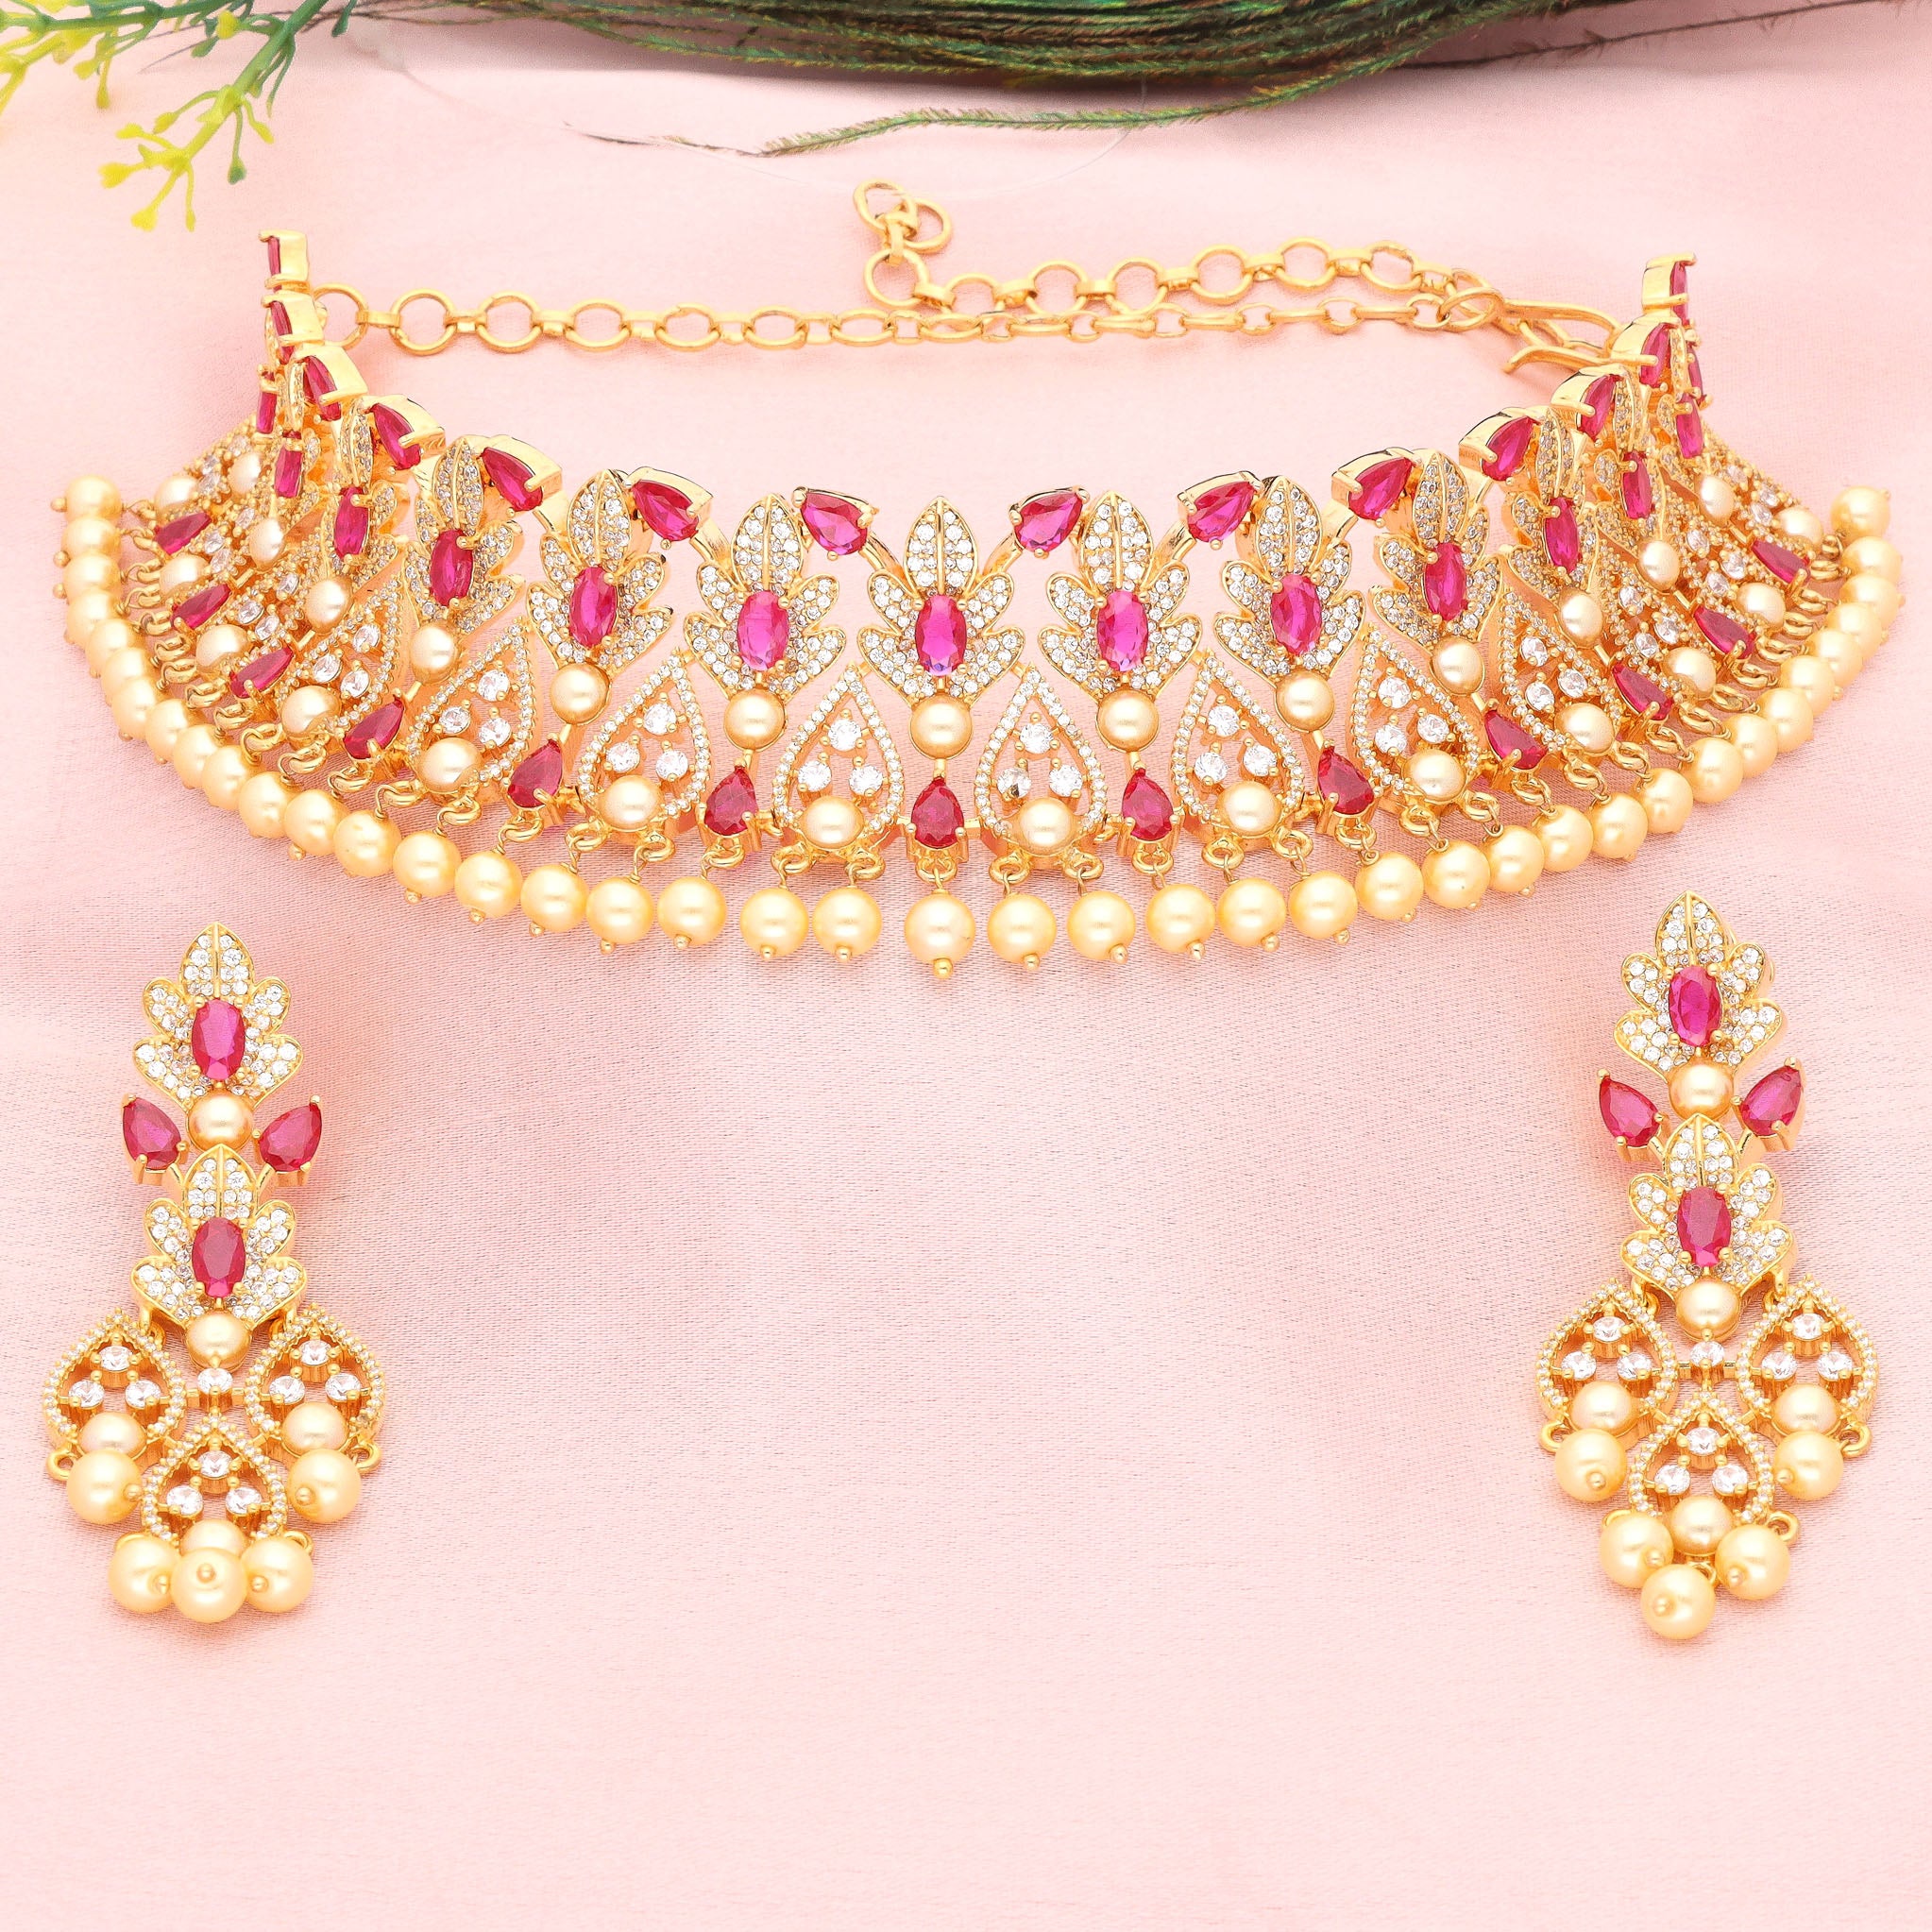 Gold Necklace Design | Bridal gold jewellery, Bridal gold jewellery designs,  Wedding jewellery designs